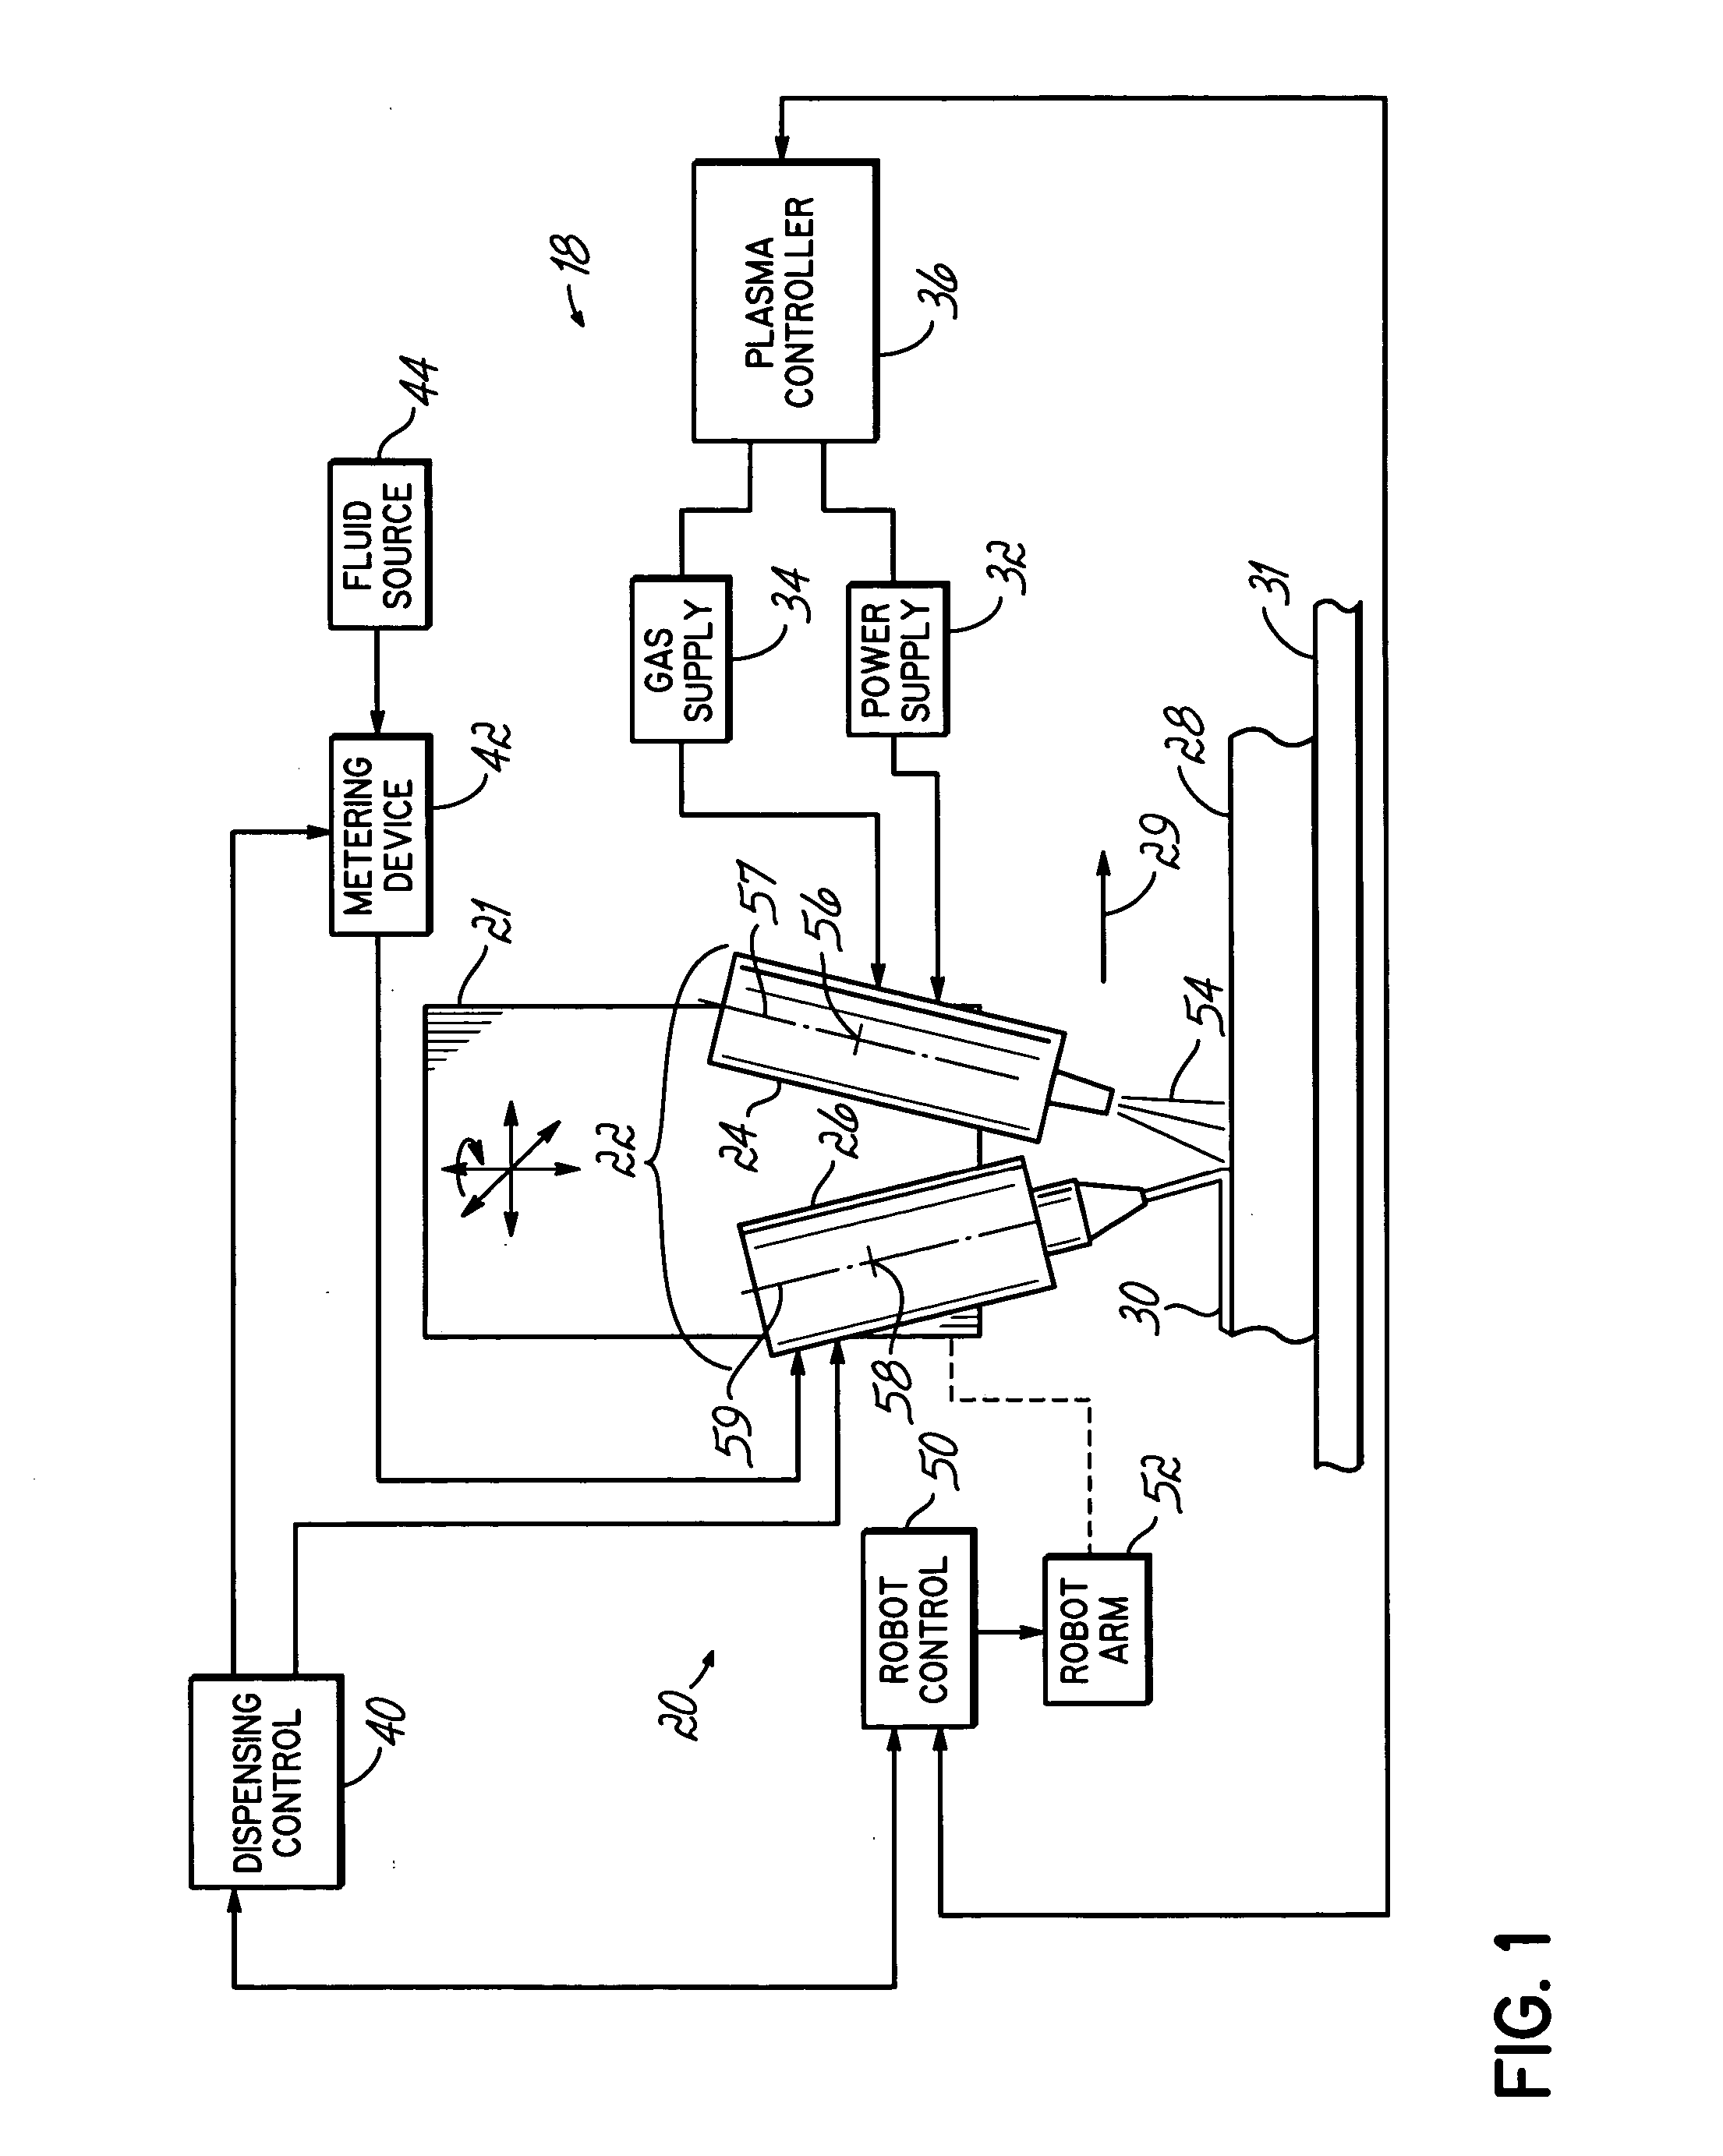 Apparatus and method for plasma treating and dispensing an adhesive/sealant onto a part